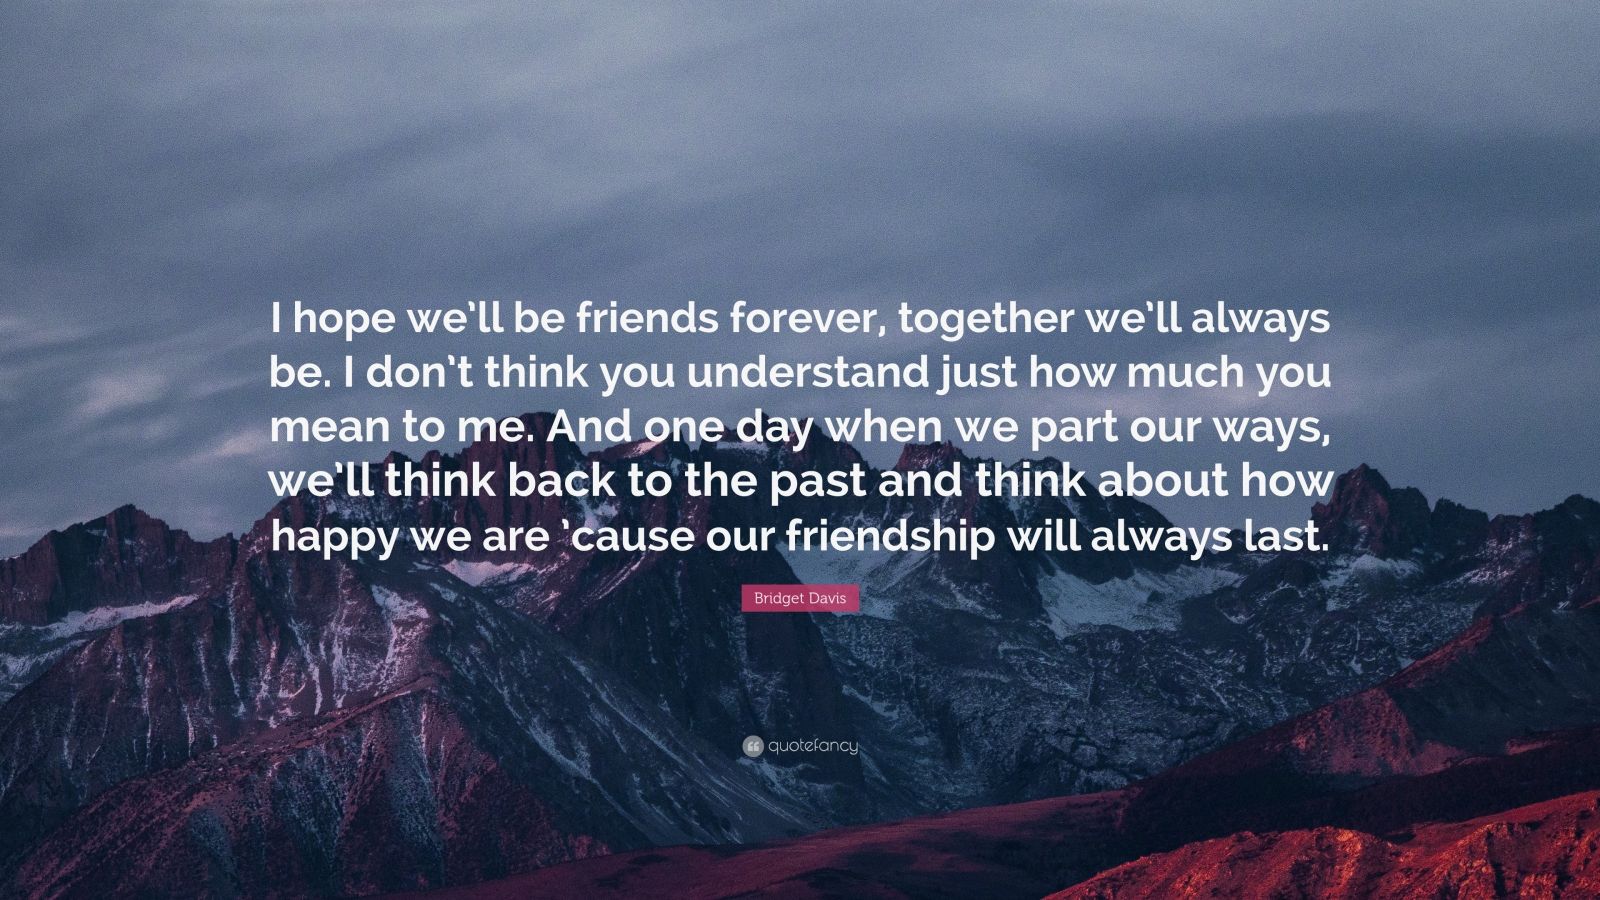 Bridget Davis Quote: “I hope we’ll be friends forever, together we’ll ...